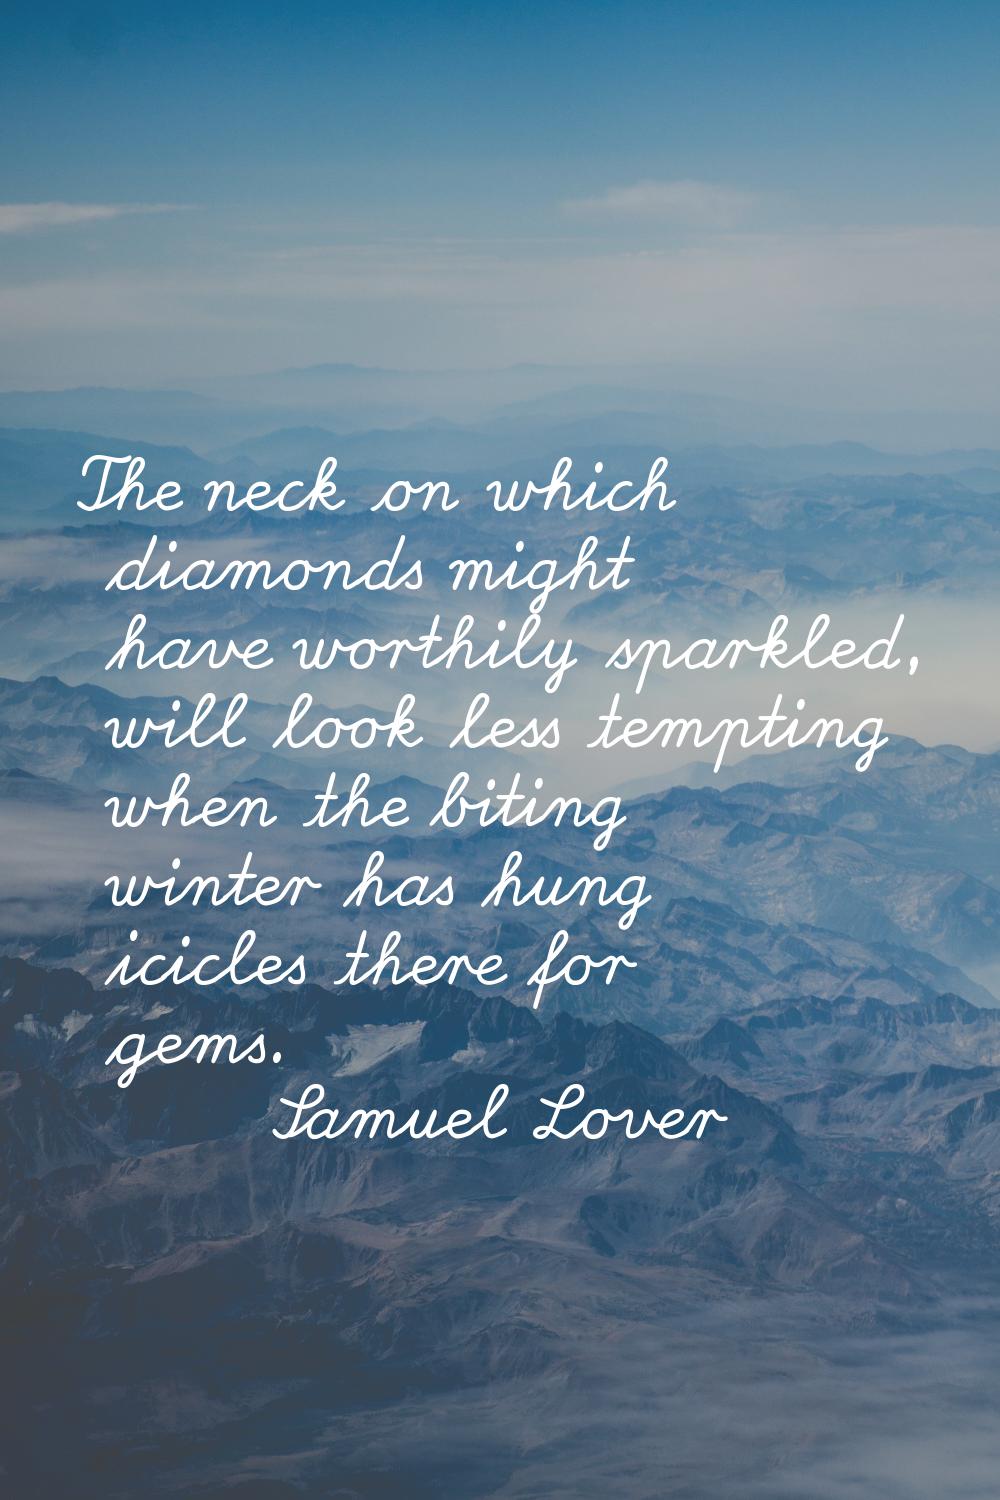 The neck on which diamonds might have worthily sparkled, will look less tempting when the biting wi